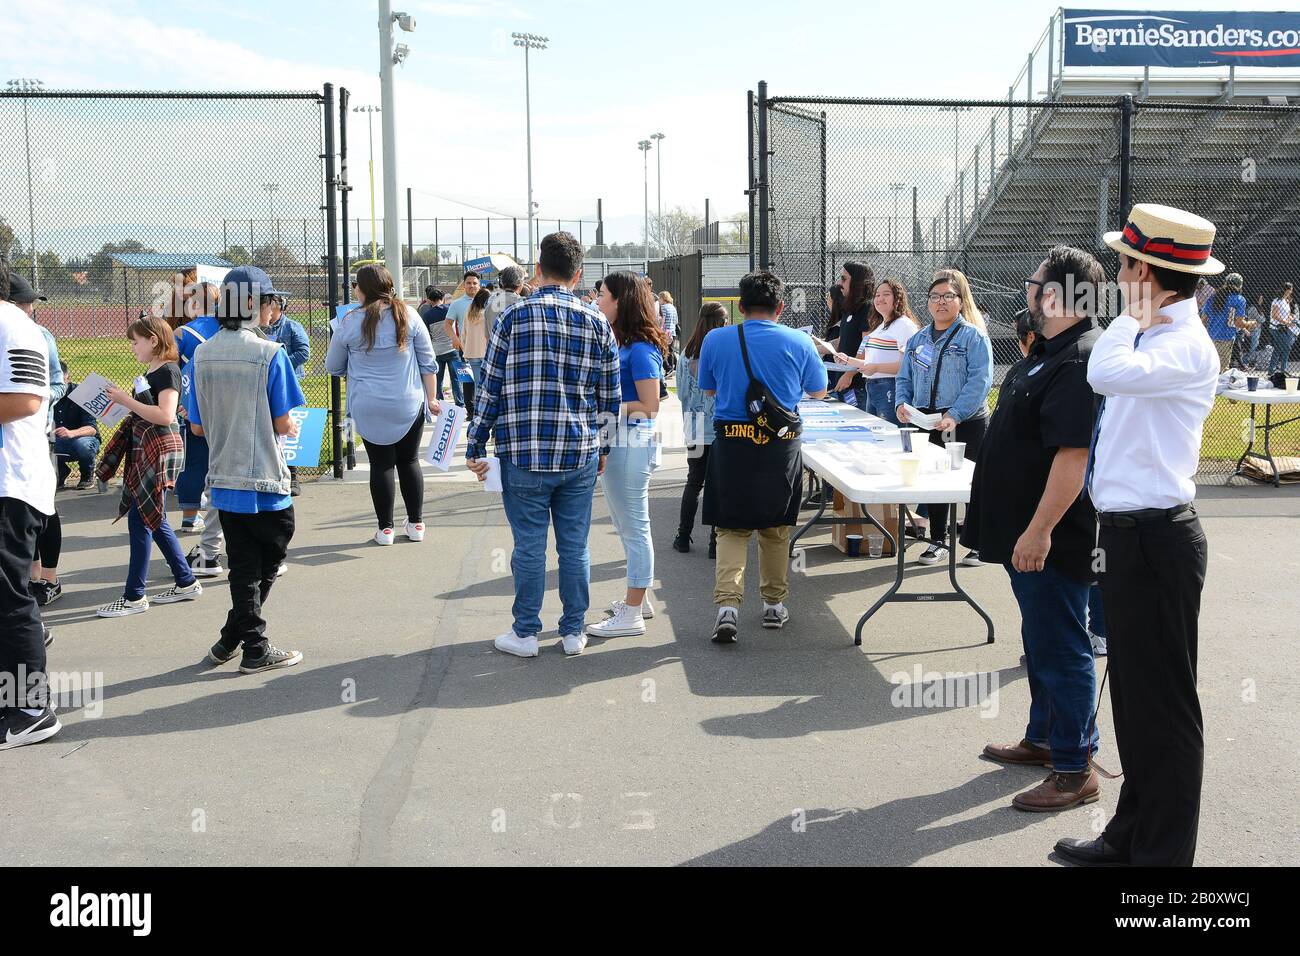 SANTA ANA, CALIFORNIA - 21 FEB 2020: Bernie Sanders Rally. Volunteers man a check-in table at a rally for the presidential candidate. Stock Photo